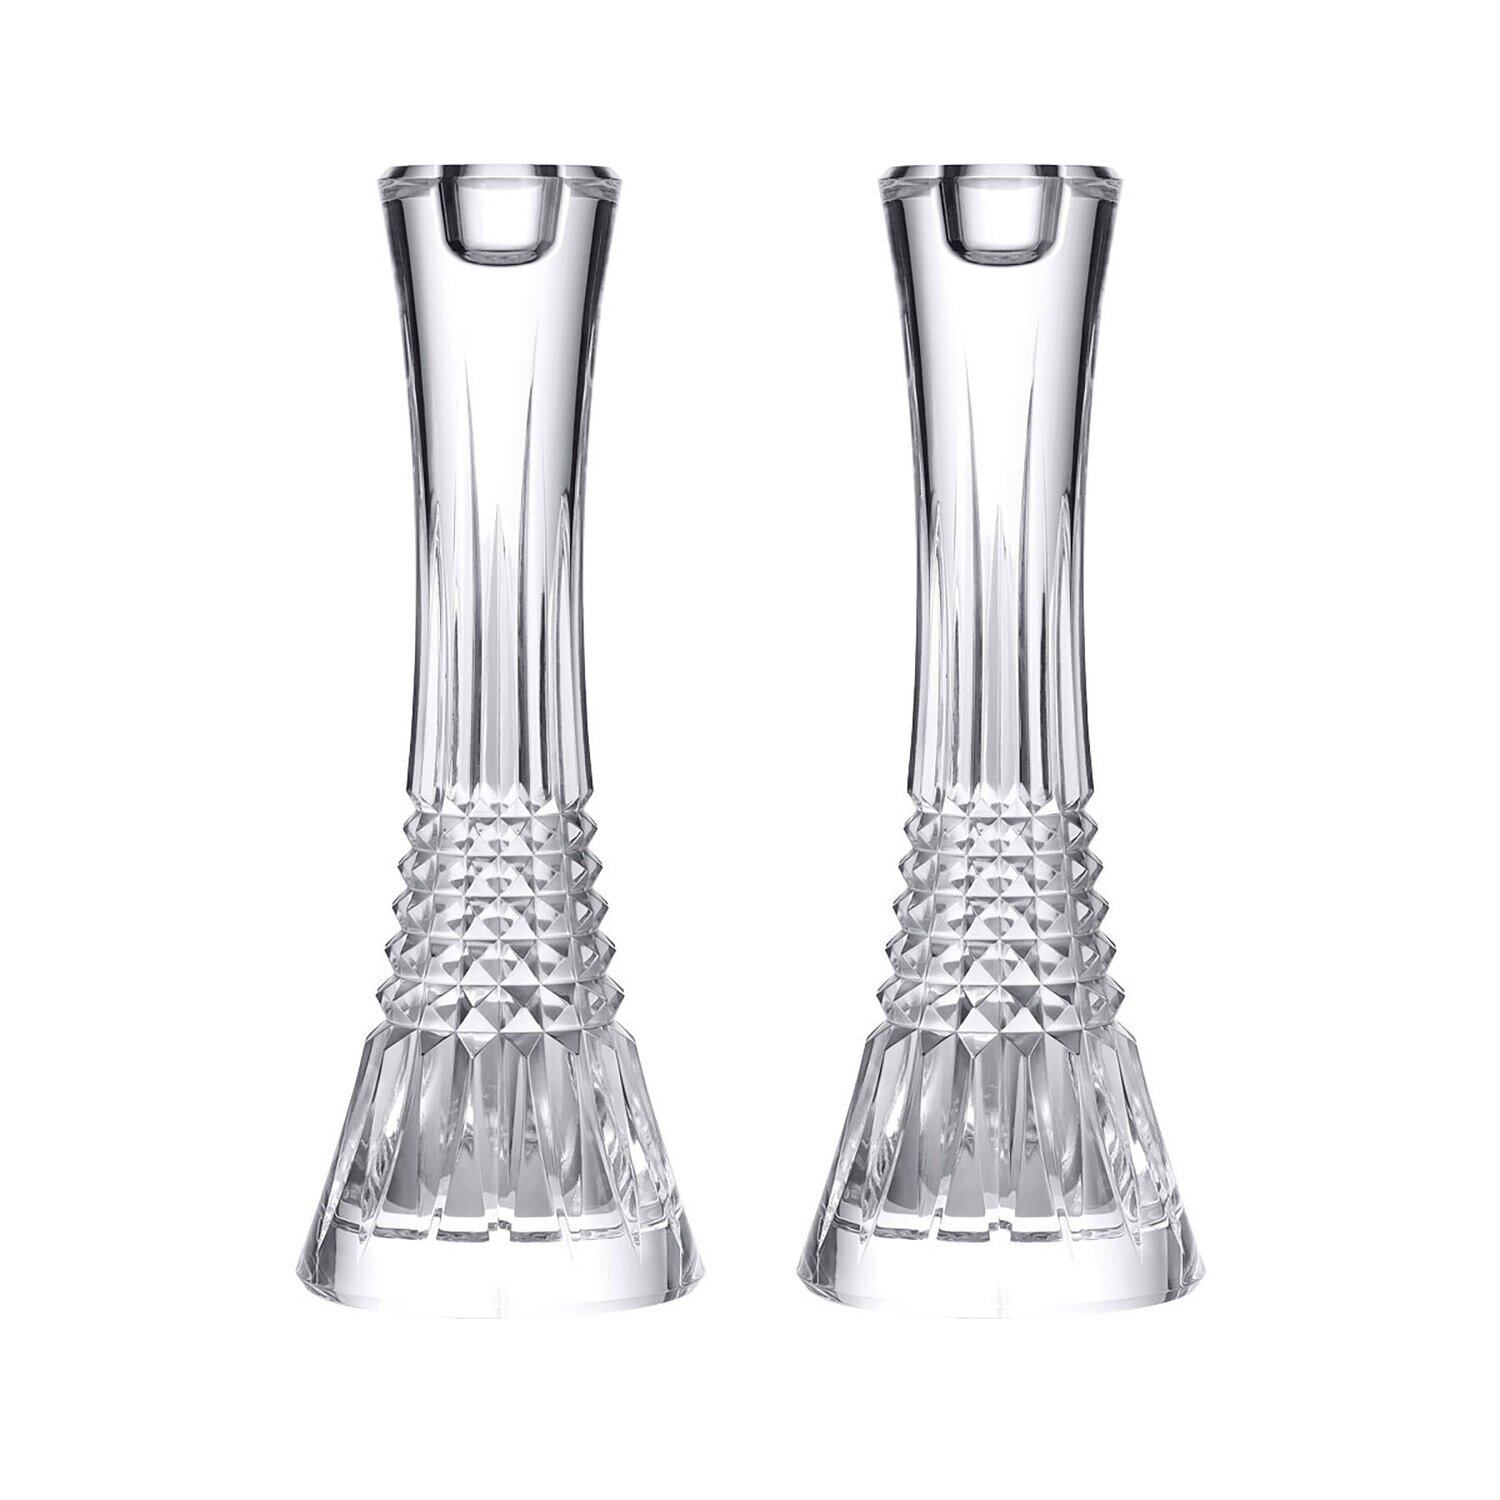 Waterford Lismore Diamond Candlestick 10 Inch Set of 2 1065331